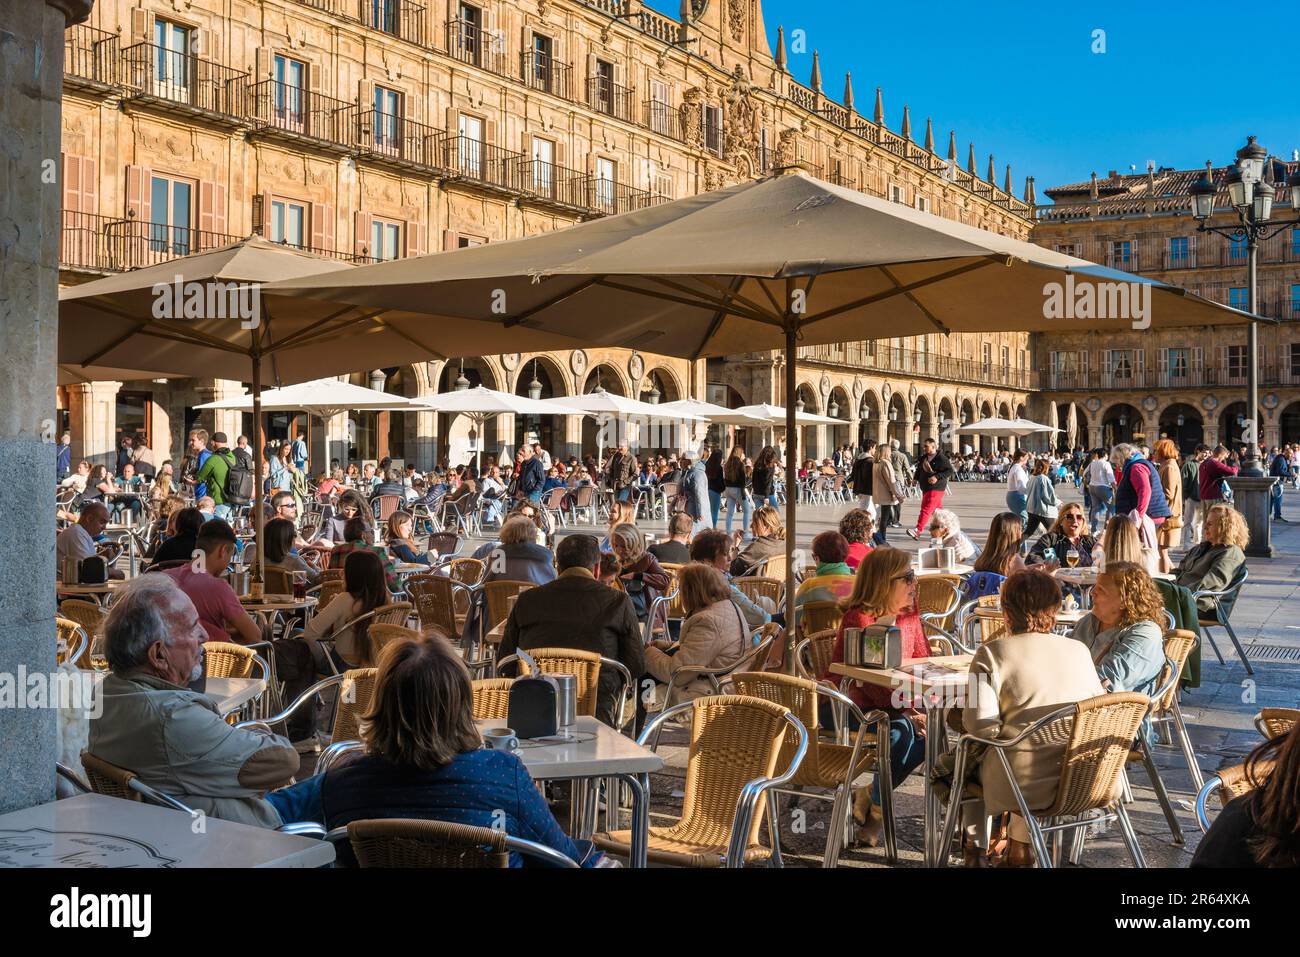 Europe tourists, view in summer of people relaxing at cafe tables in the Plaza Mayor in the historic Baroque city of Salamanca, Spain Stock Photo